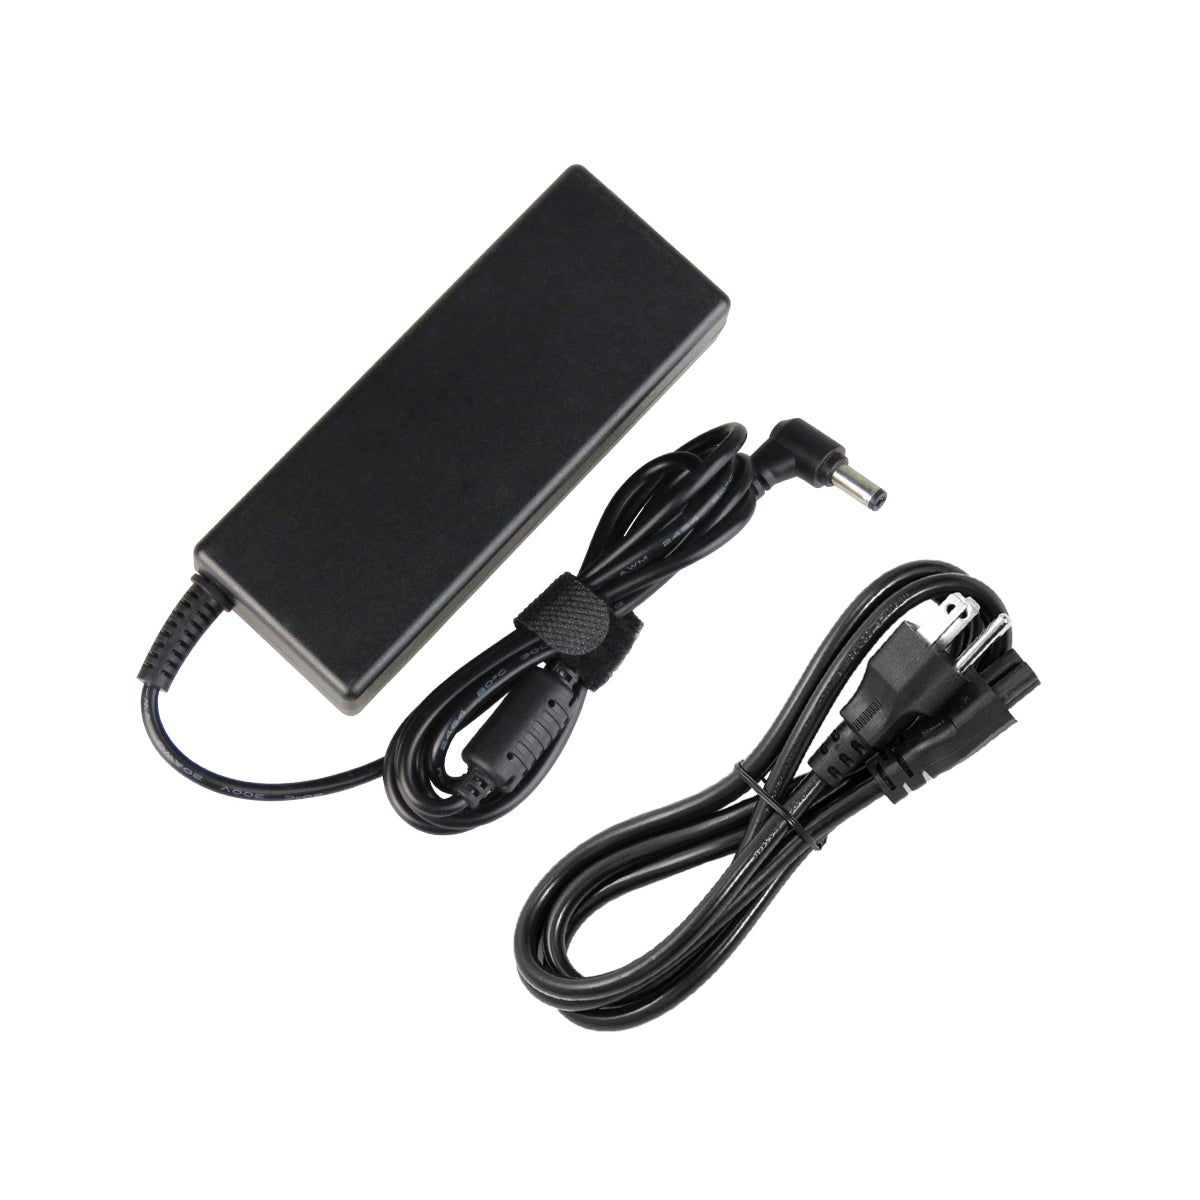 AC Adapter Charger for ASUS X73 Notebook.